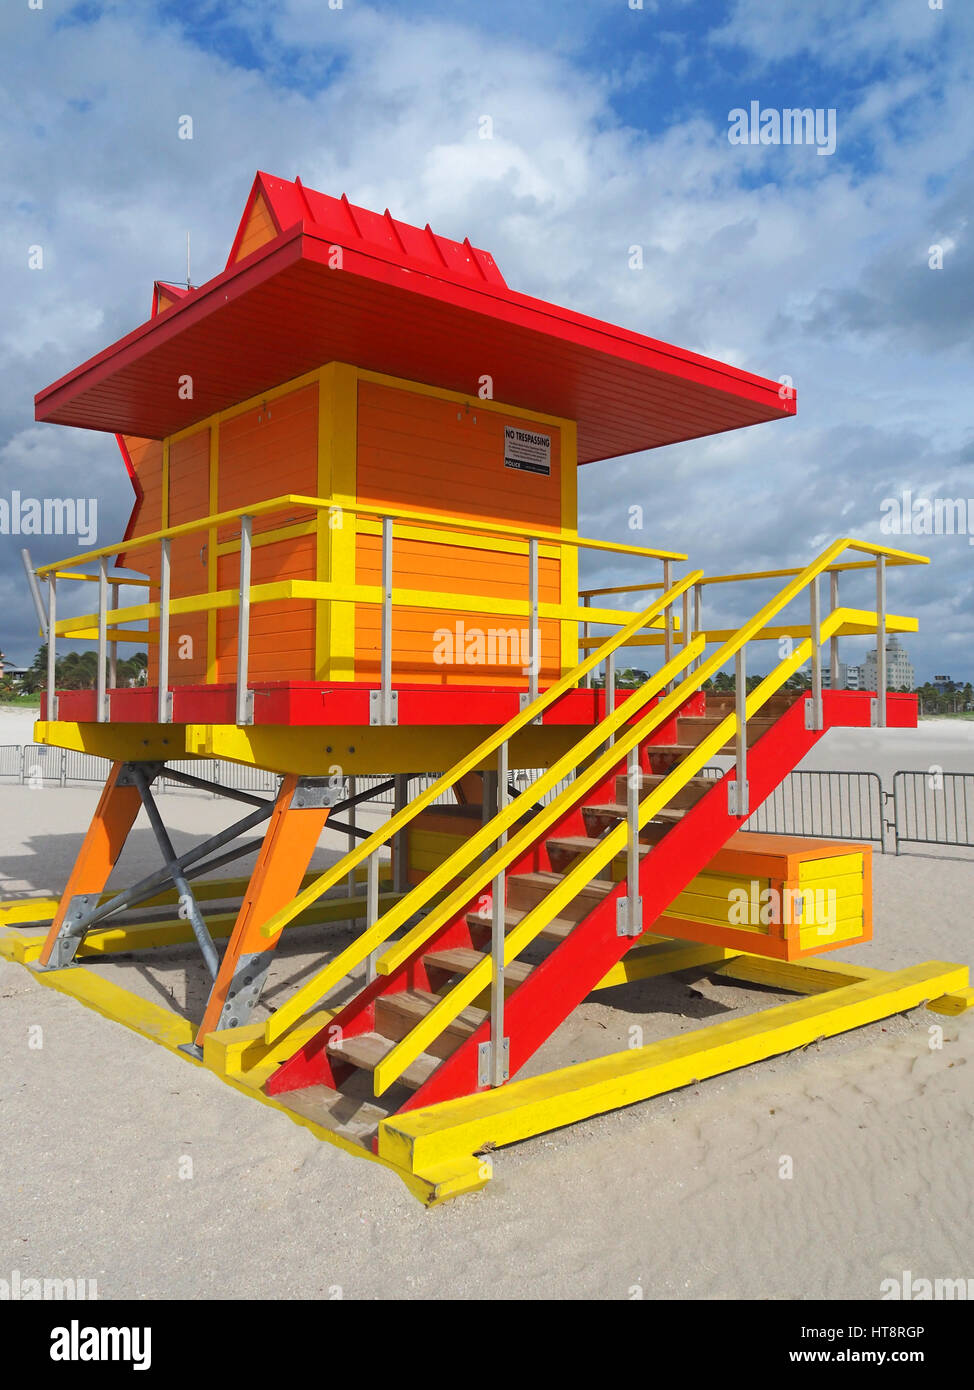 South Miami Beach lifeguard station. Banque D'Images